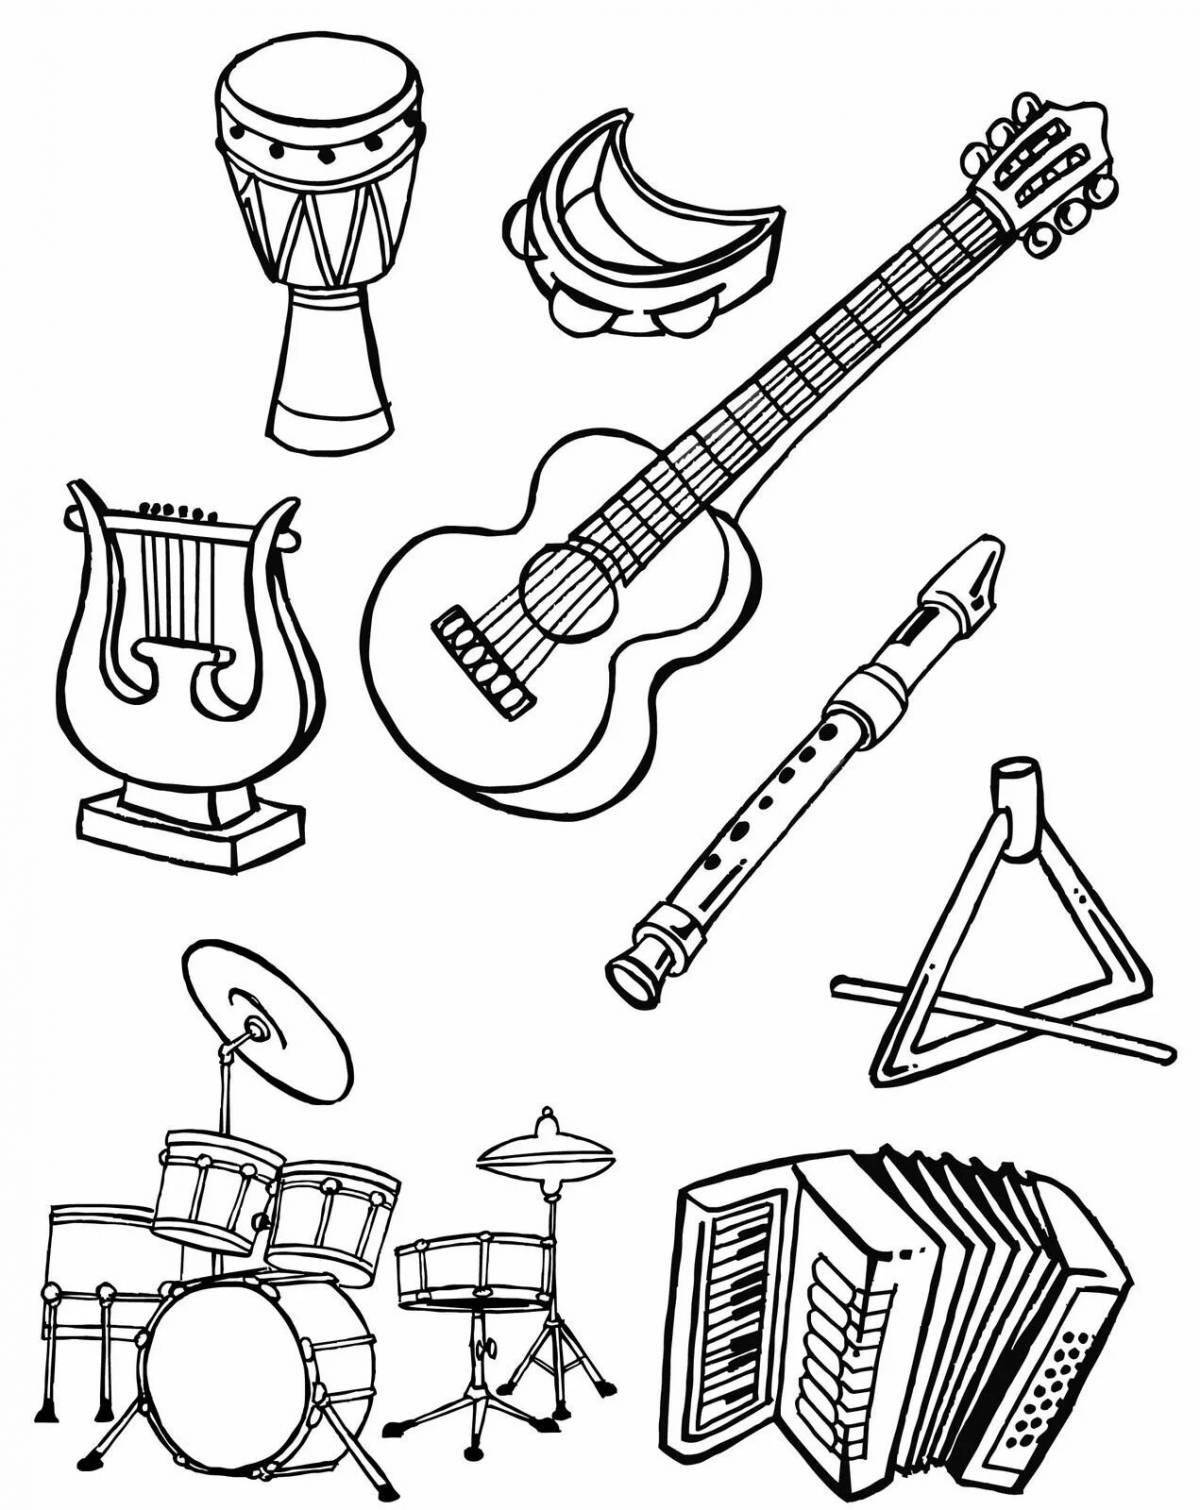 Colorful musical instruments coloring book for preschoolers